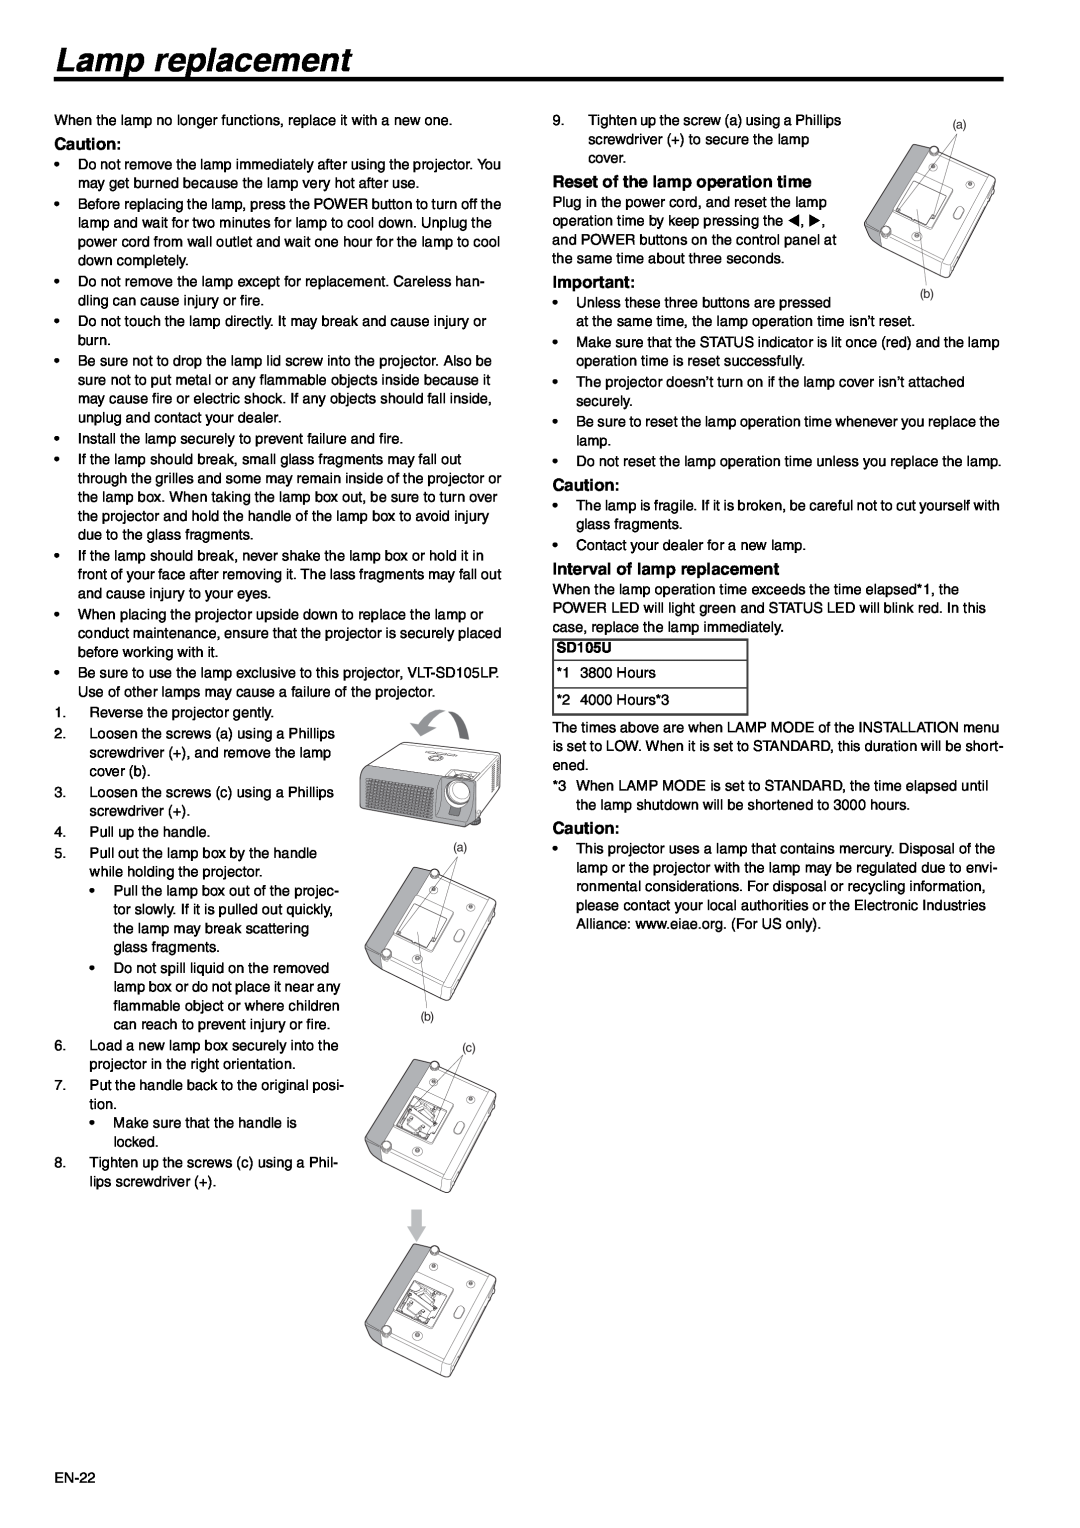 Mitsubishi Electronics SD105U user manual Lamp replacement, Reset of the lamp operation time, Interval of lamp replacement 